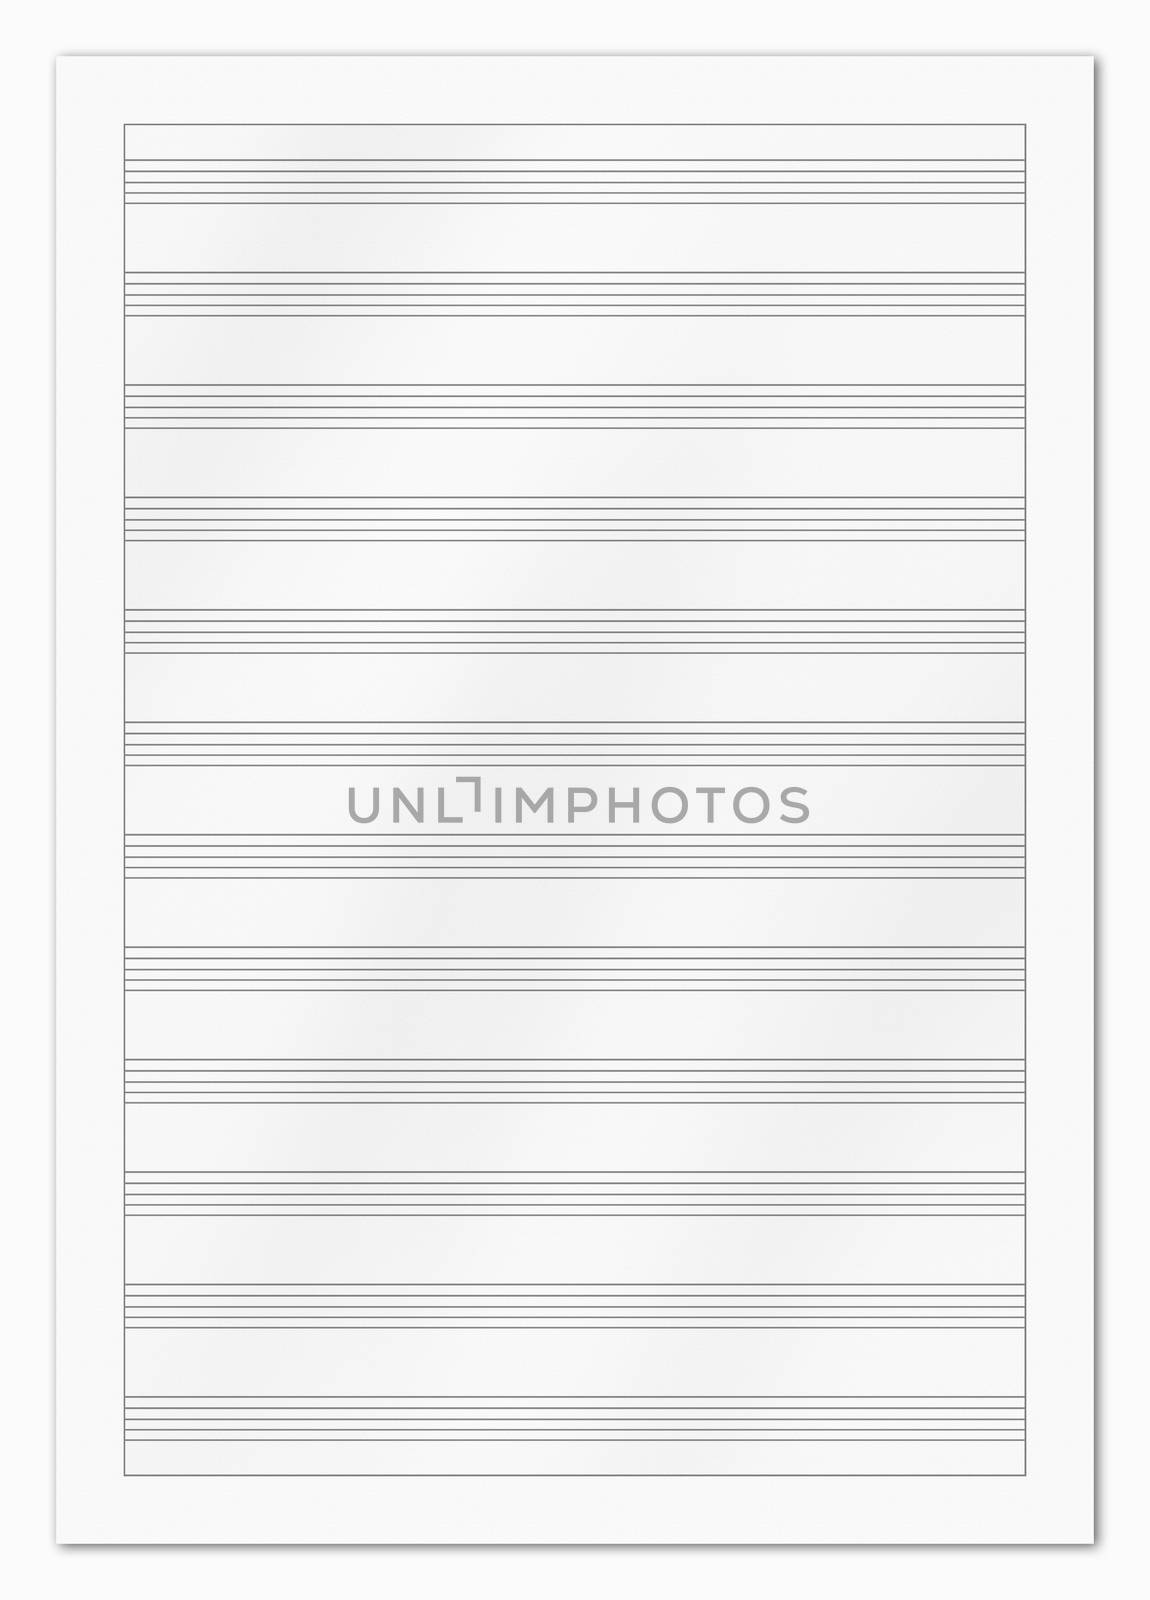 Blank music paper isolated on white by Attila